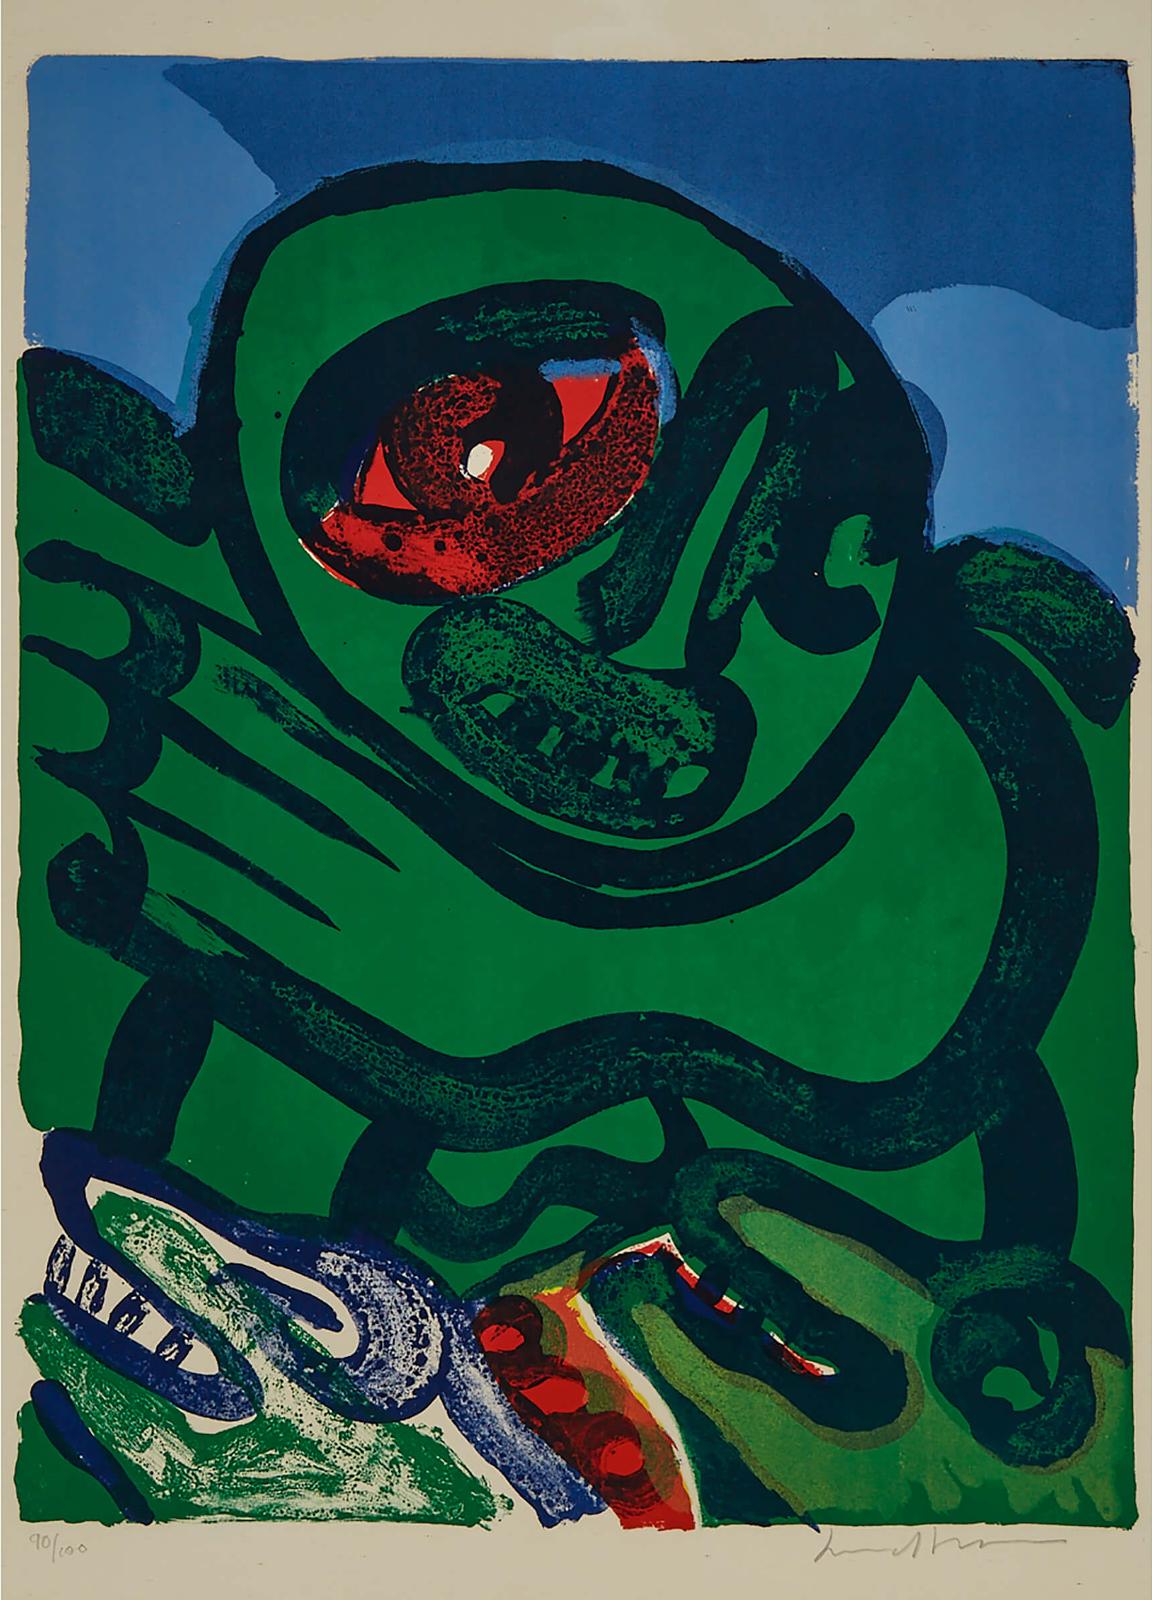 Bengt LIndstrom (1925-2008) - Figure With Red Face And Animals; Green Figure With Red Eye